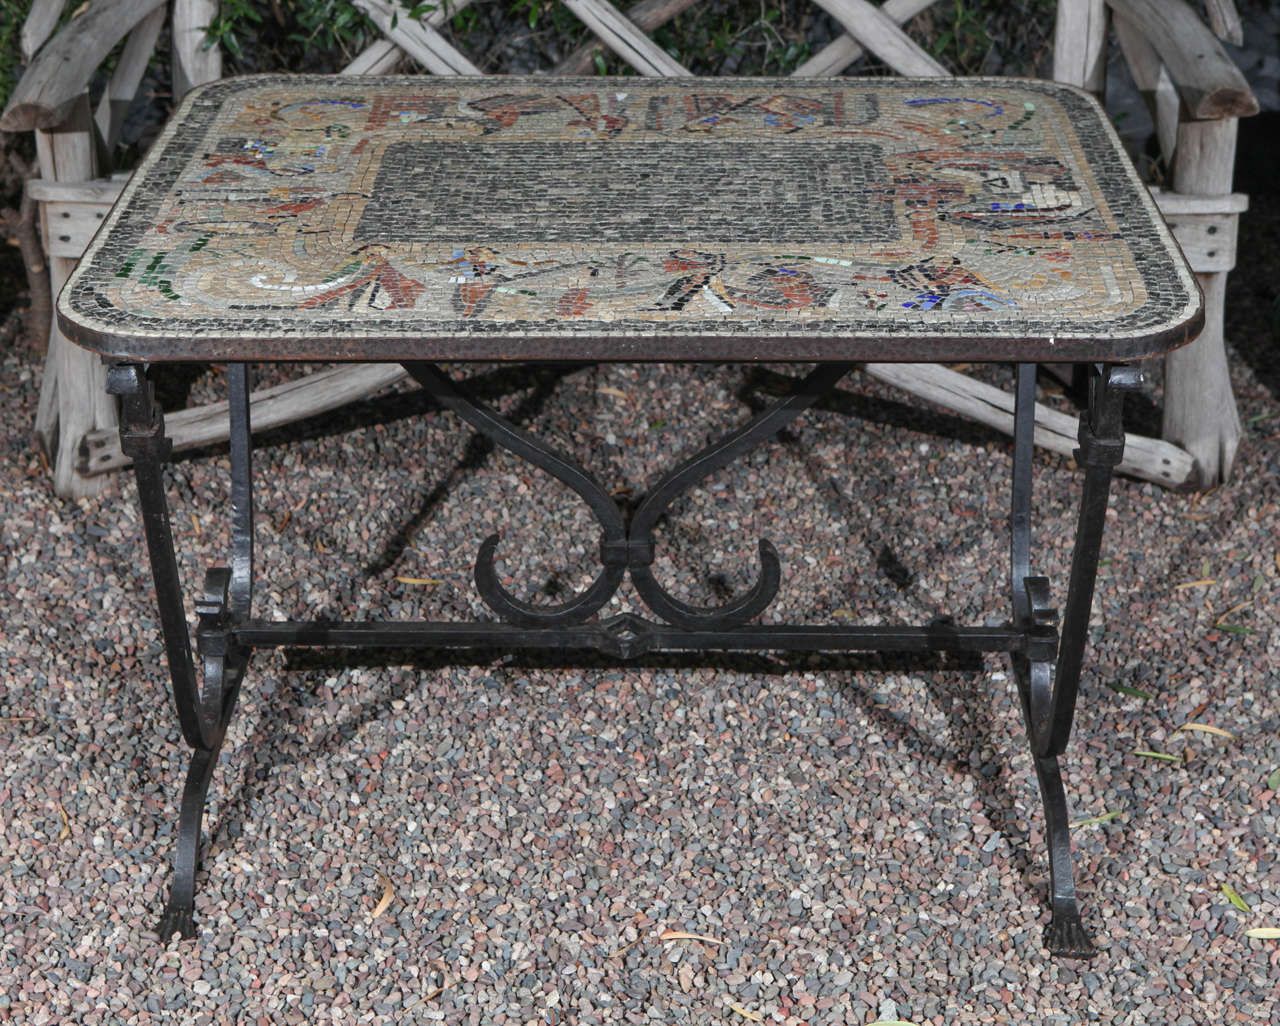 Iron Table With Mosaic Stone Top For Sale At 1stdibs Regarding Most Recent Mosaic Black Iron Outdoor Accent Tables (View 7 of 15)